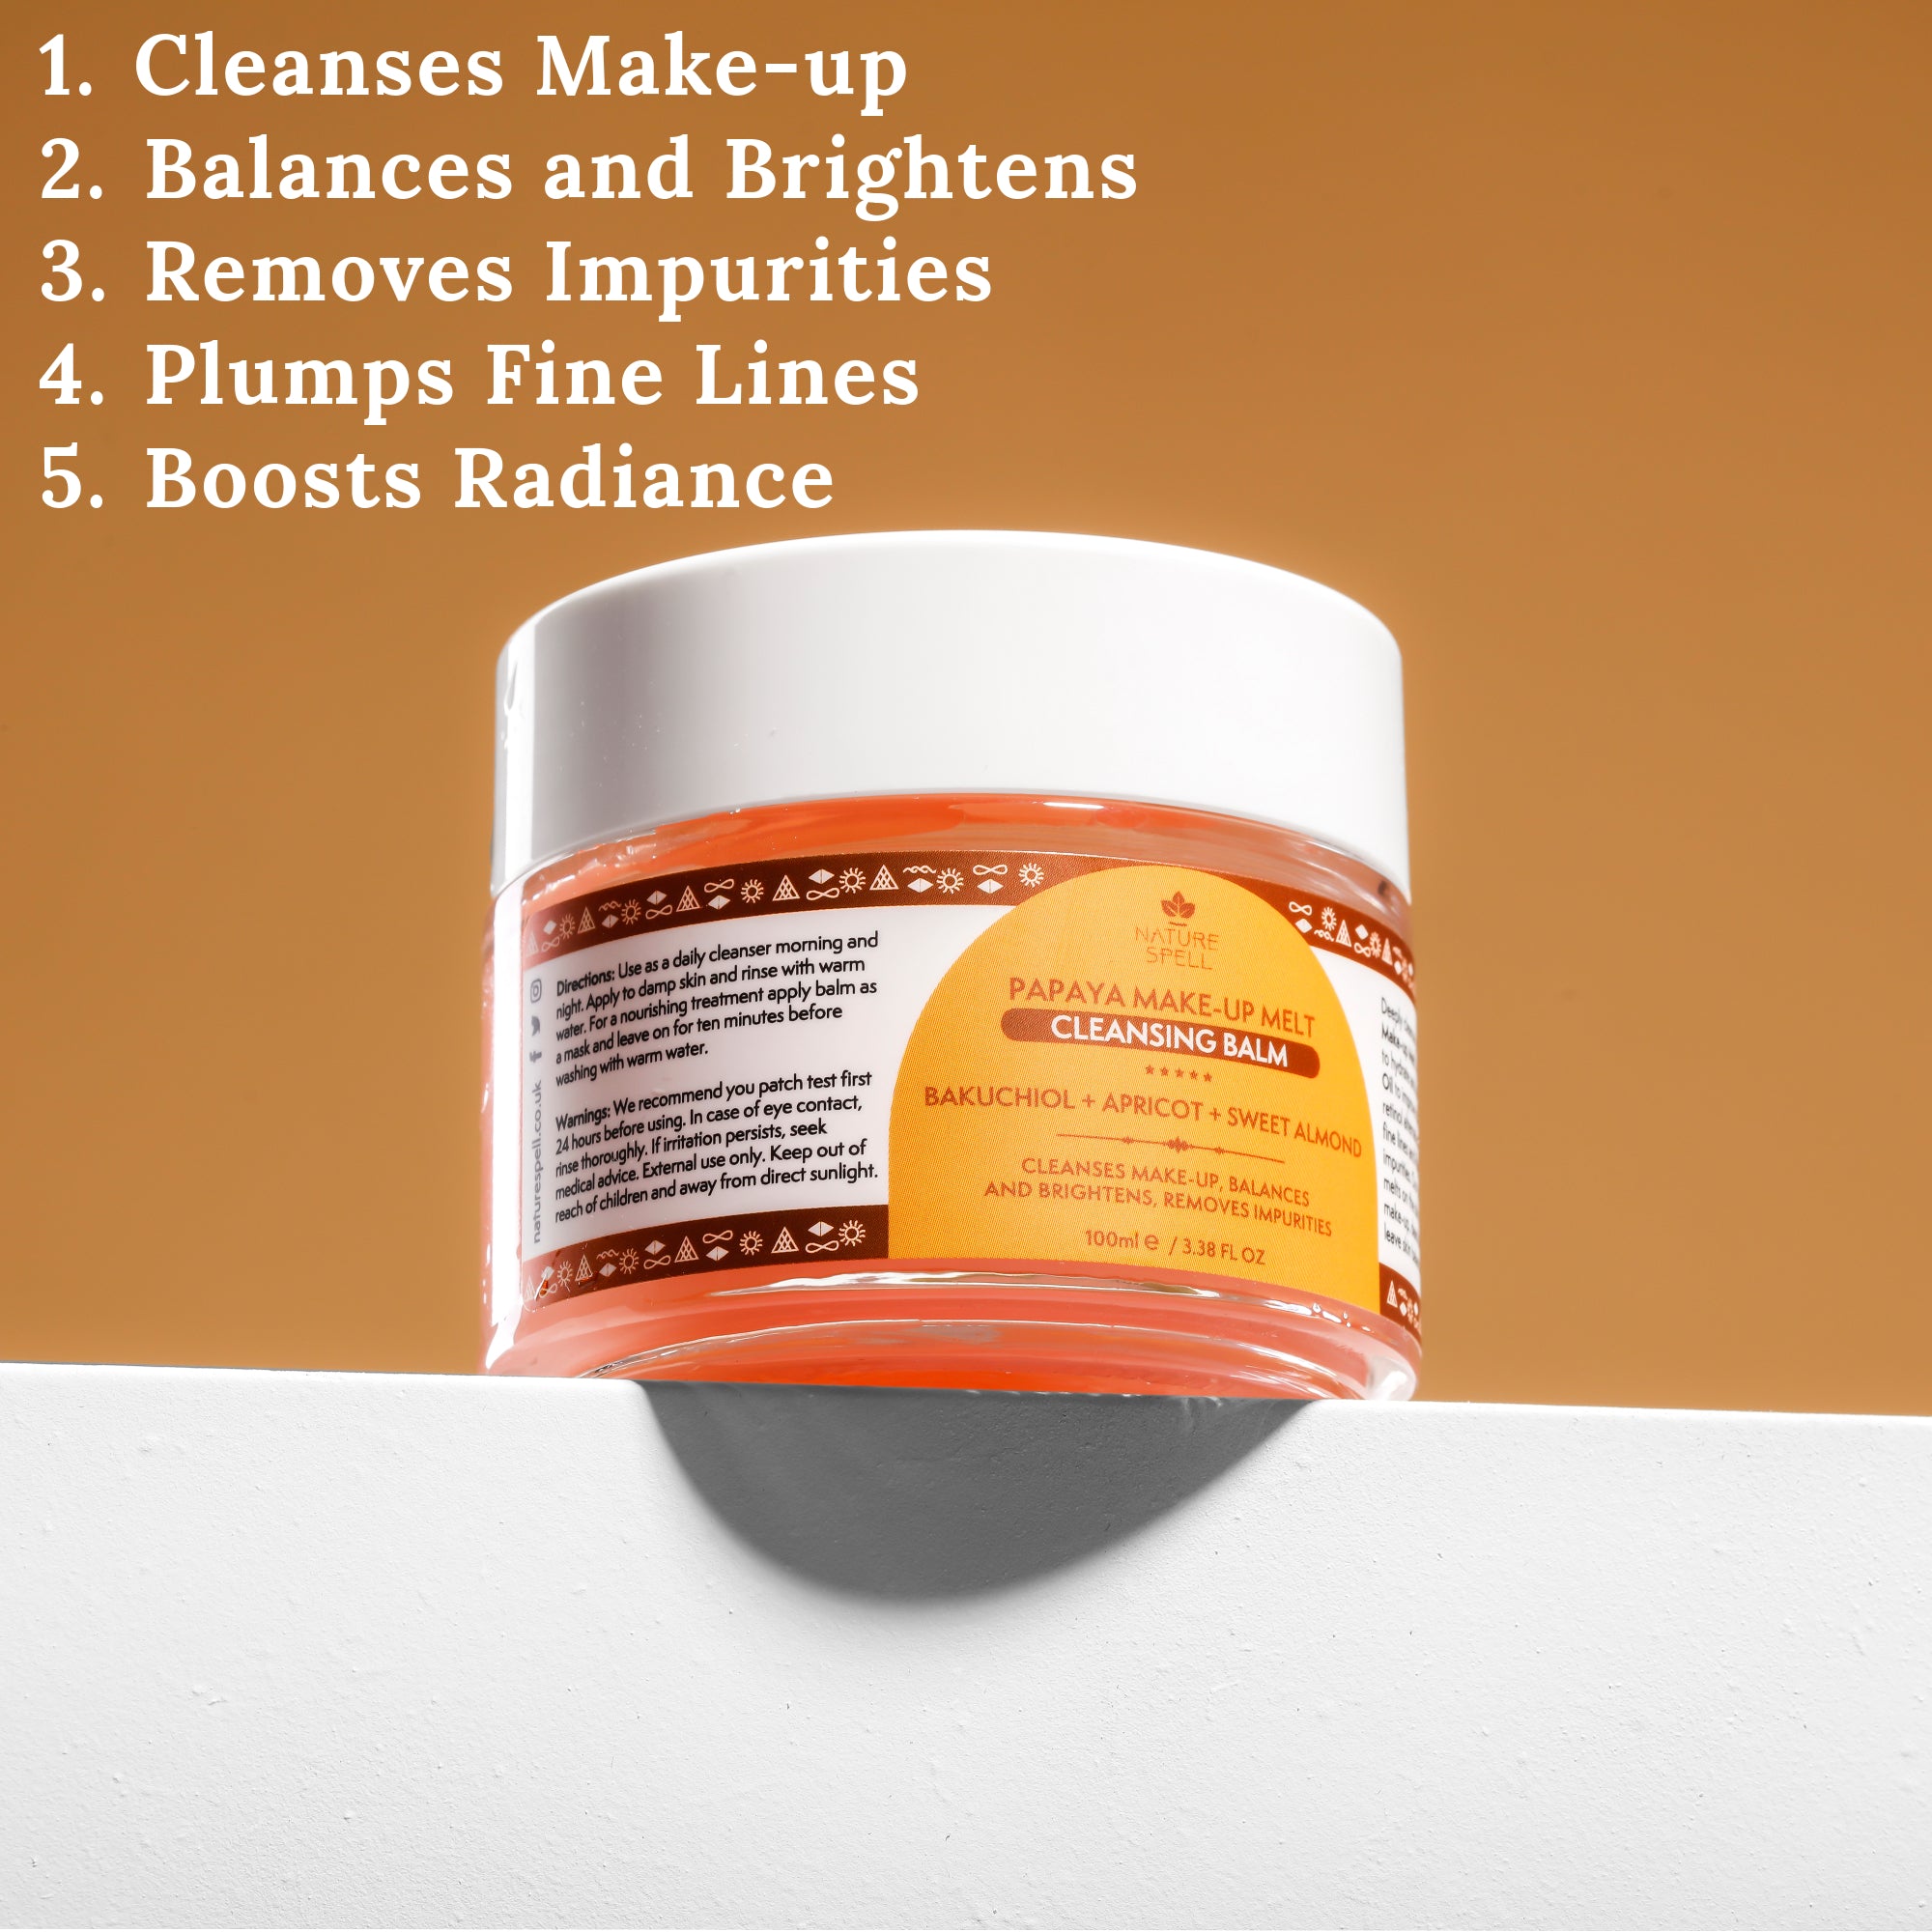 Double Cleansing Duo: Papaya Make-up Melt Cleansing Balm & Rose Aloe Vera Facial Cleanser